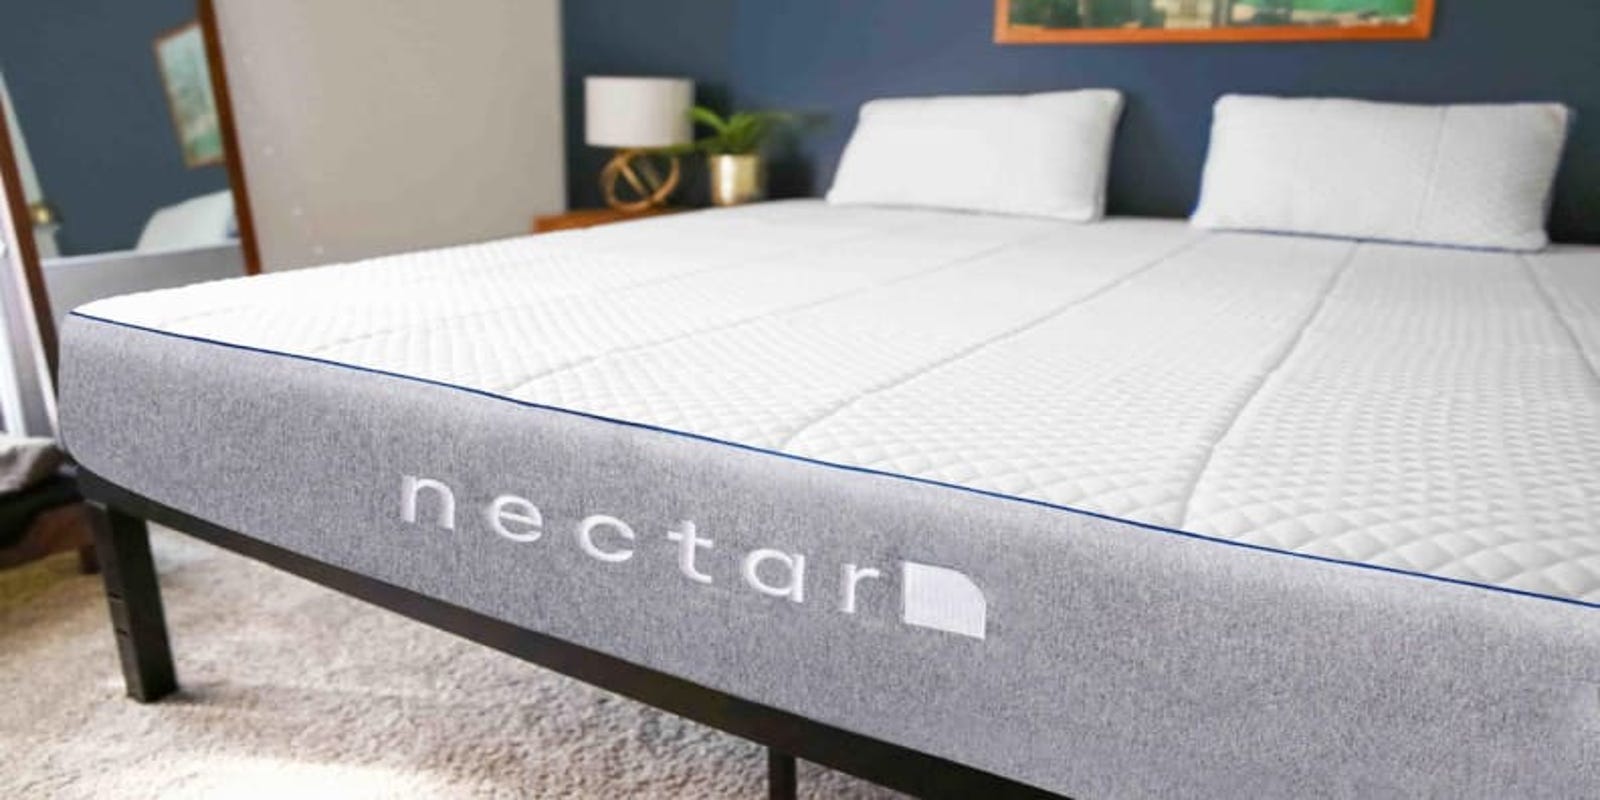 Black Friday 2020 The best mattress deals on Nectar, Sleep Number and more